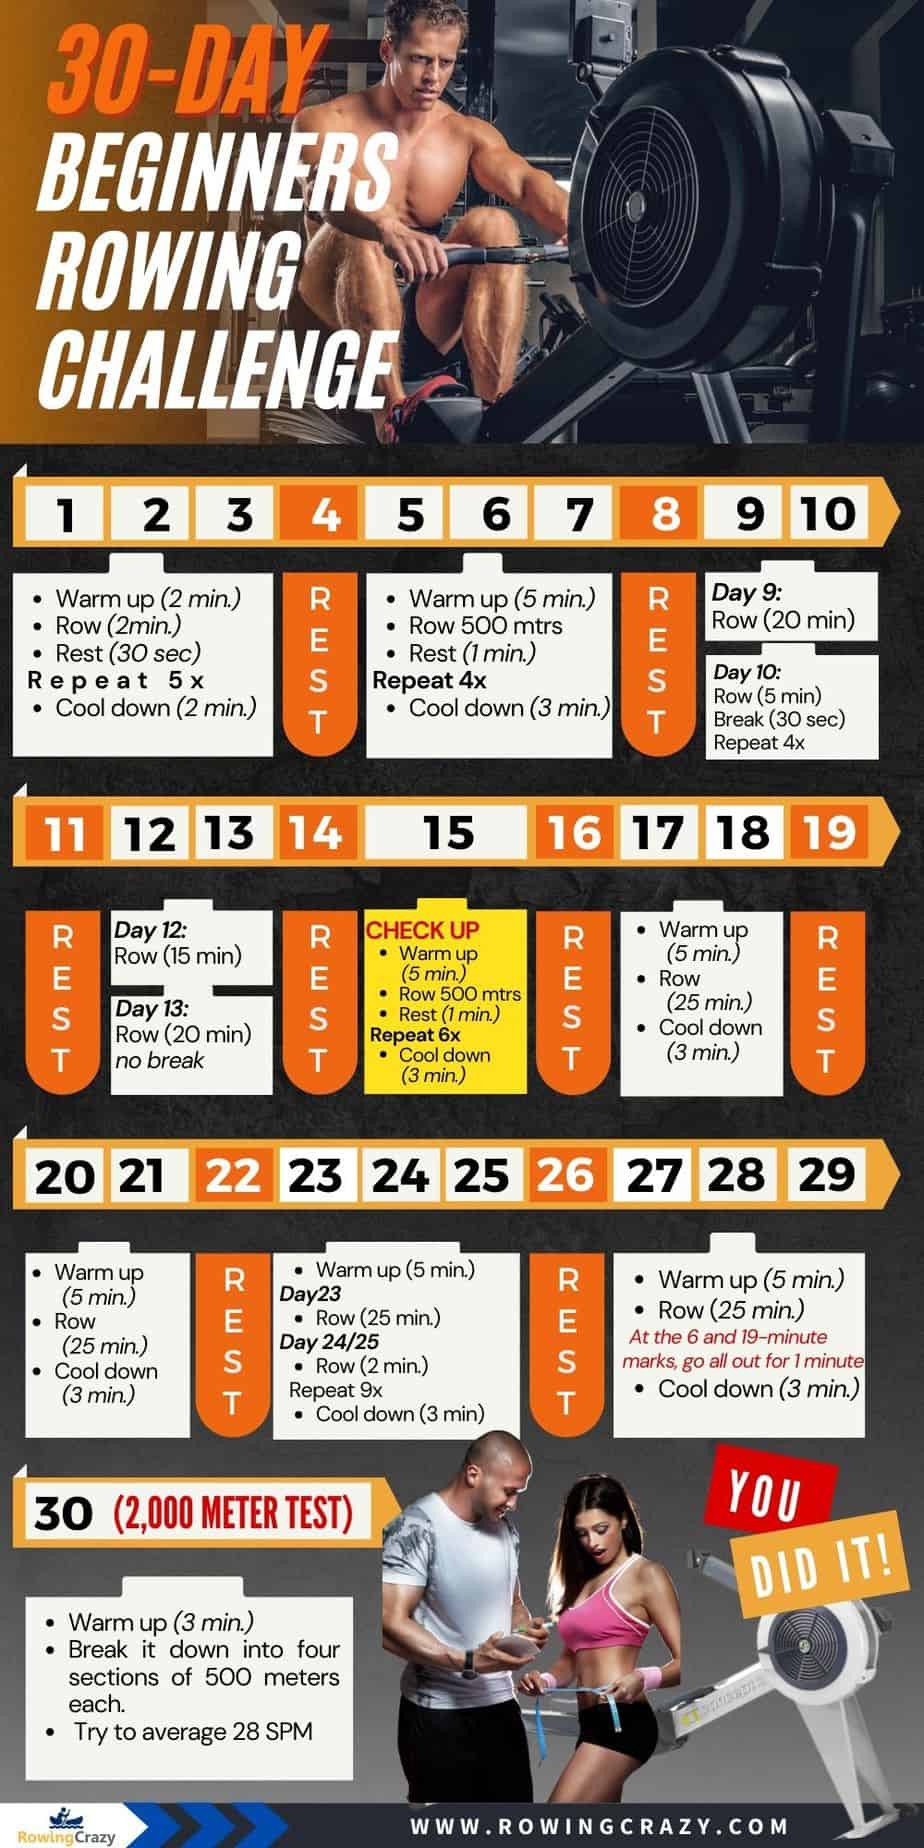 www.rowingcrazy.com - 30 Day beginners rowing challenge chart